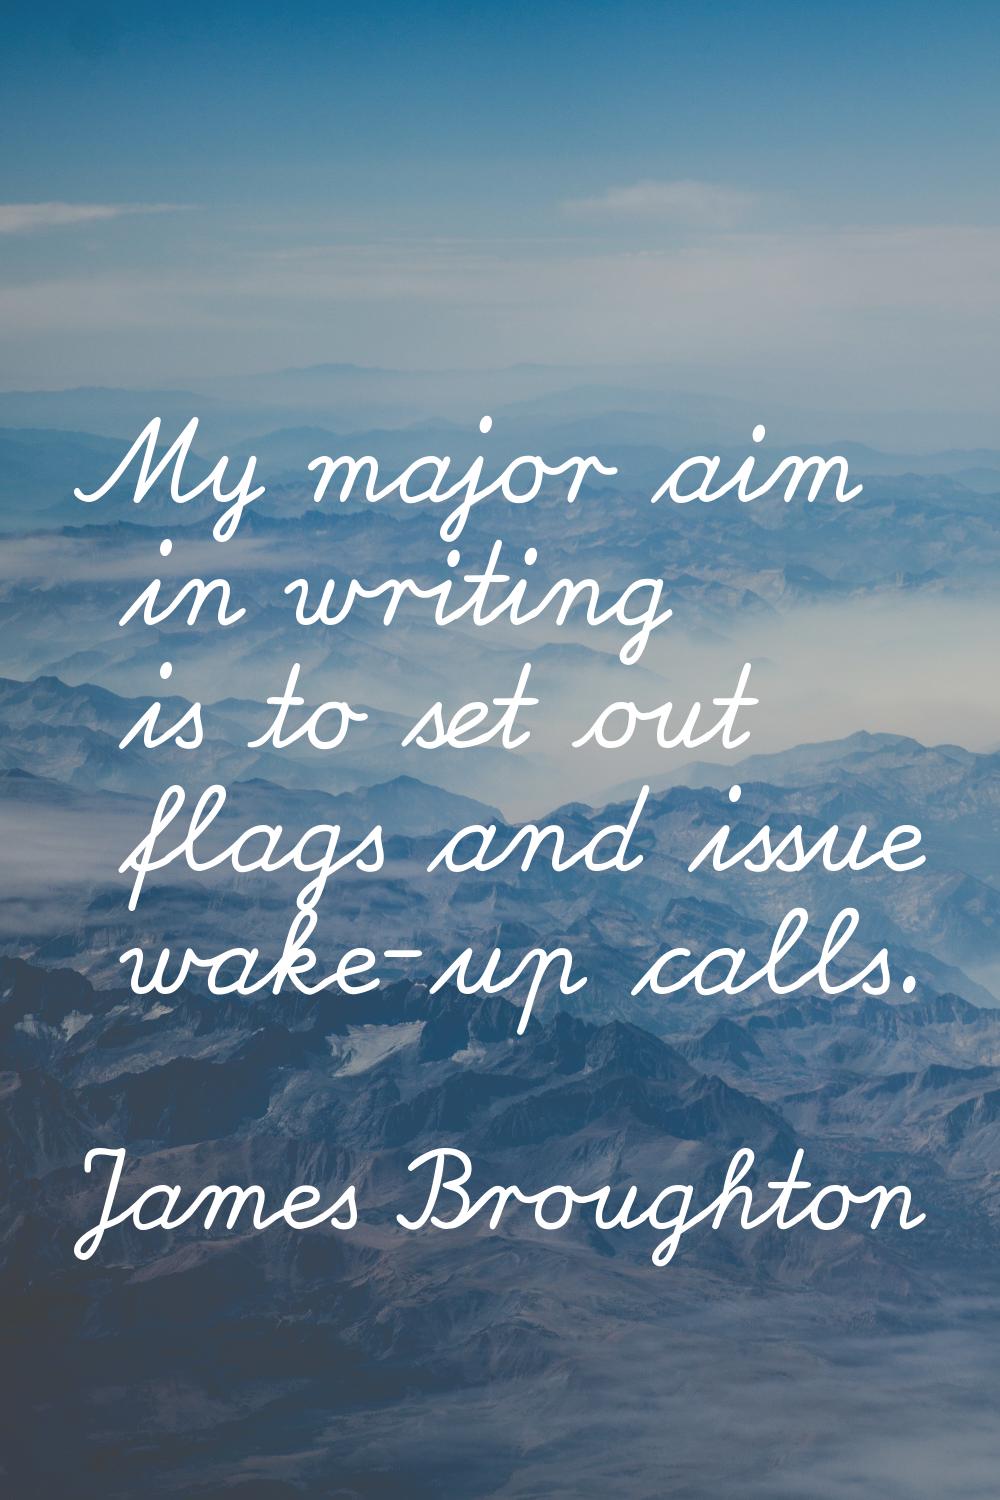 My major aim in writing is to set out flags and issue wake-up calls.